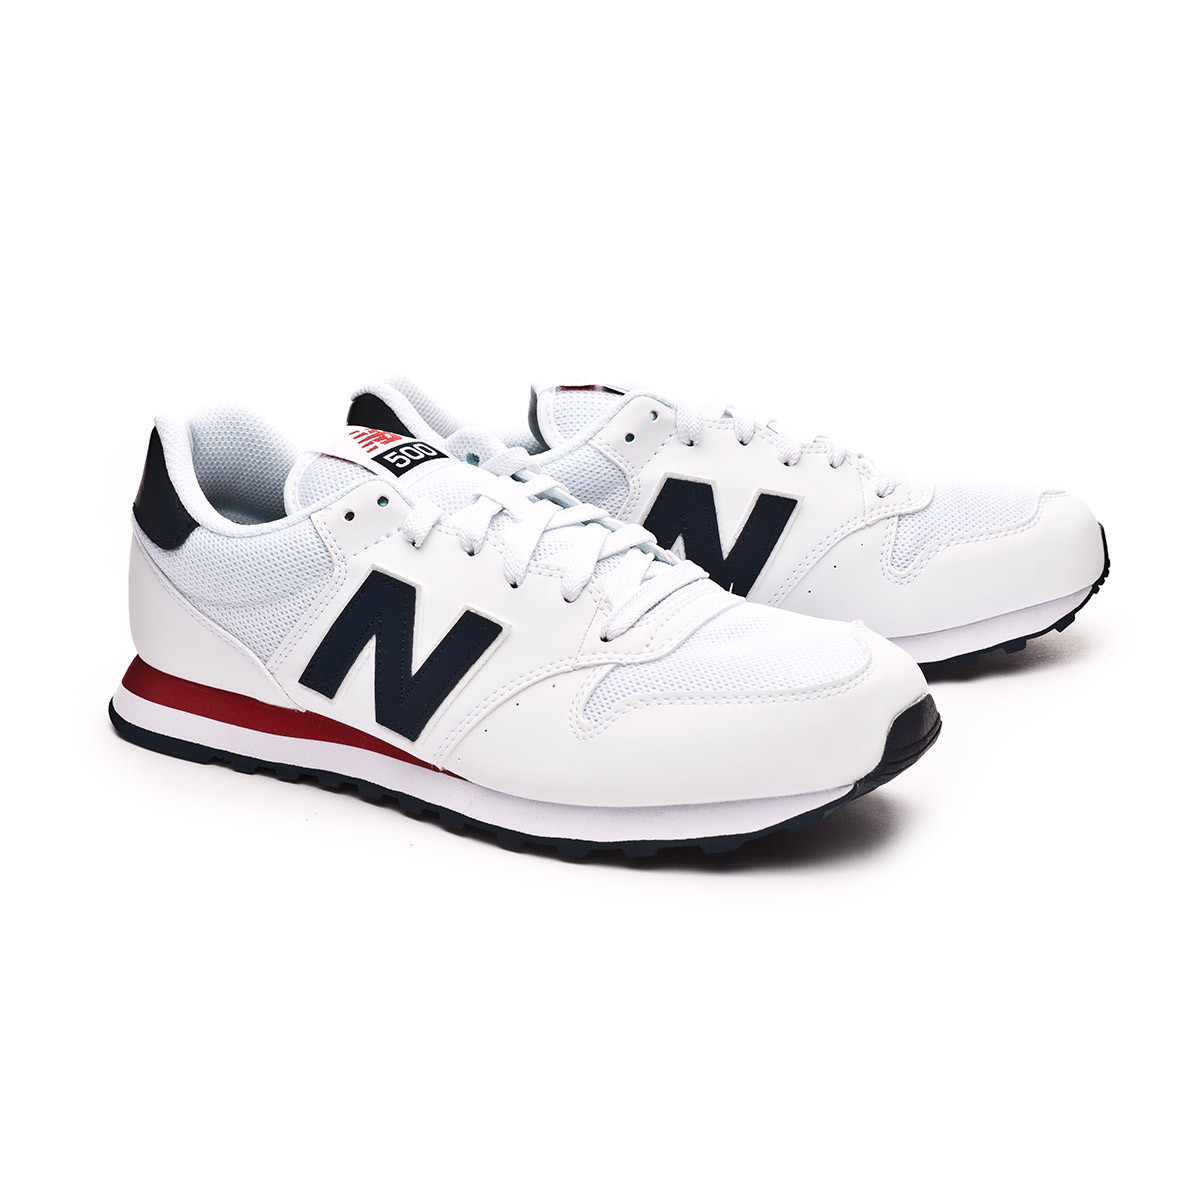 nb 500 trainers Online Shopping mall | Find the best prices and places to  buy -